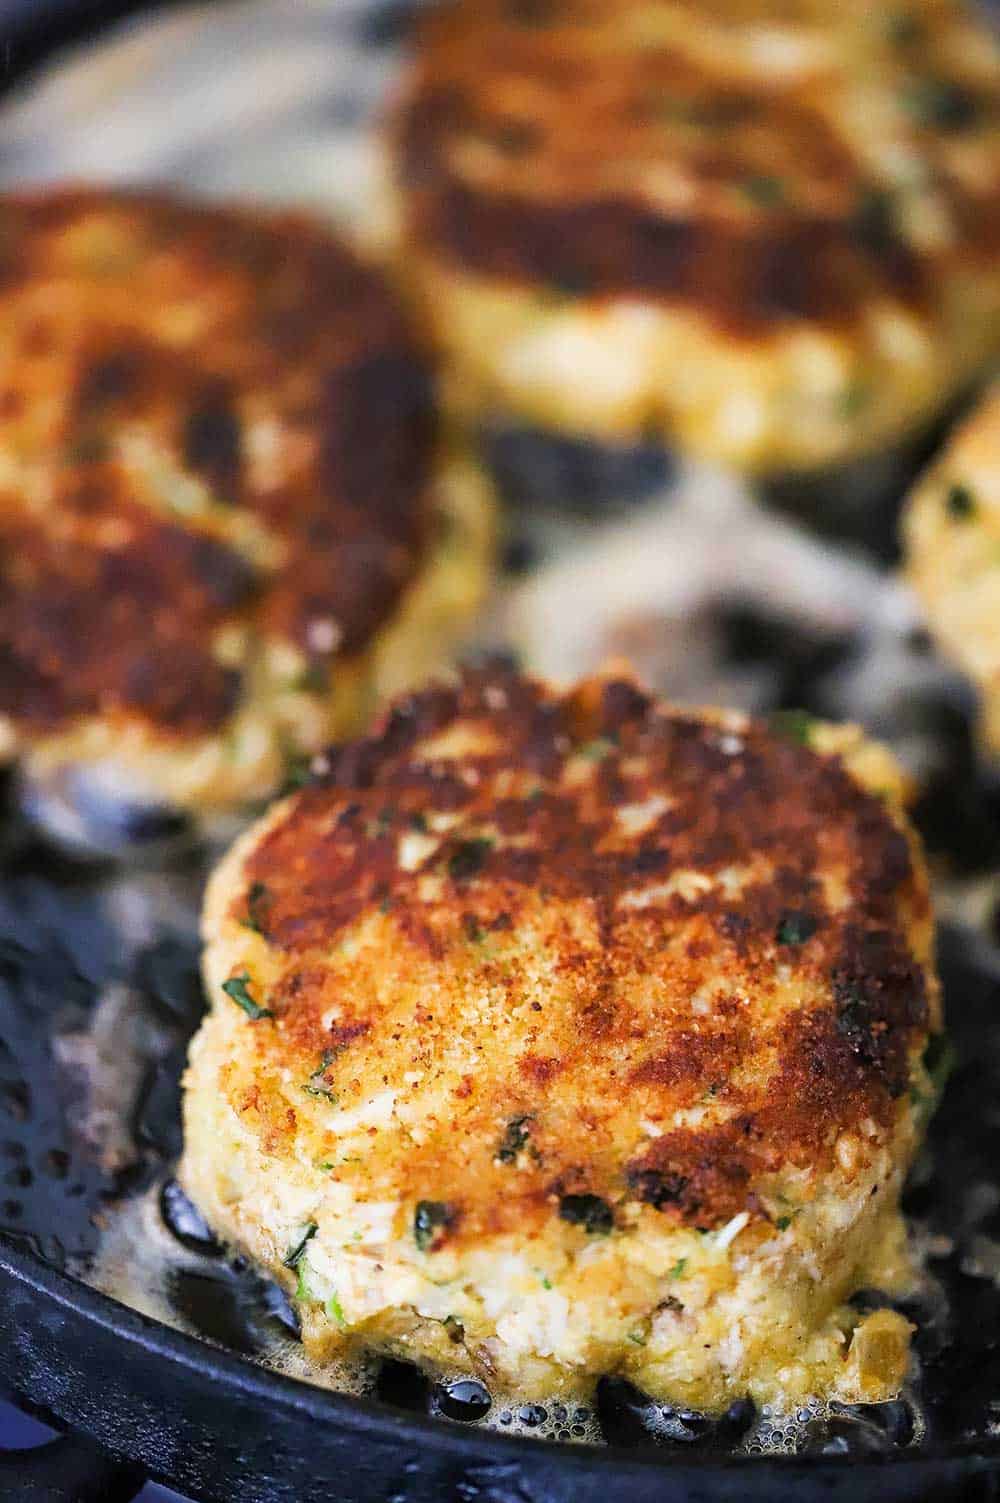 https://howtofeedaloon.com/wp-content/uploads/2023/05/crab-cake-cooking.jpg